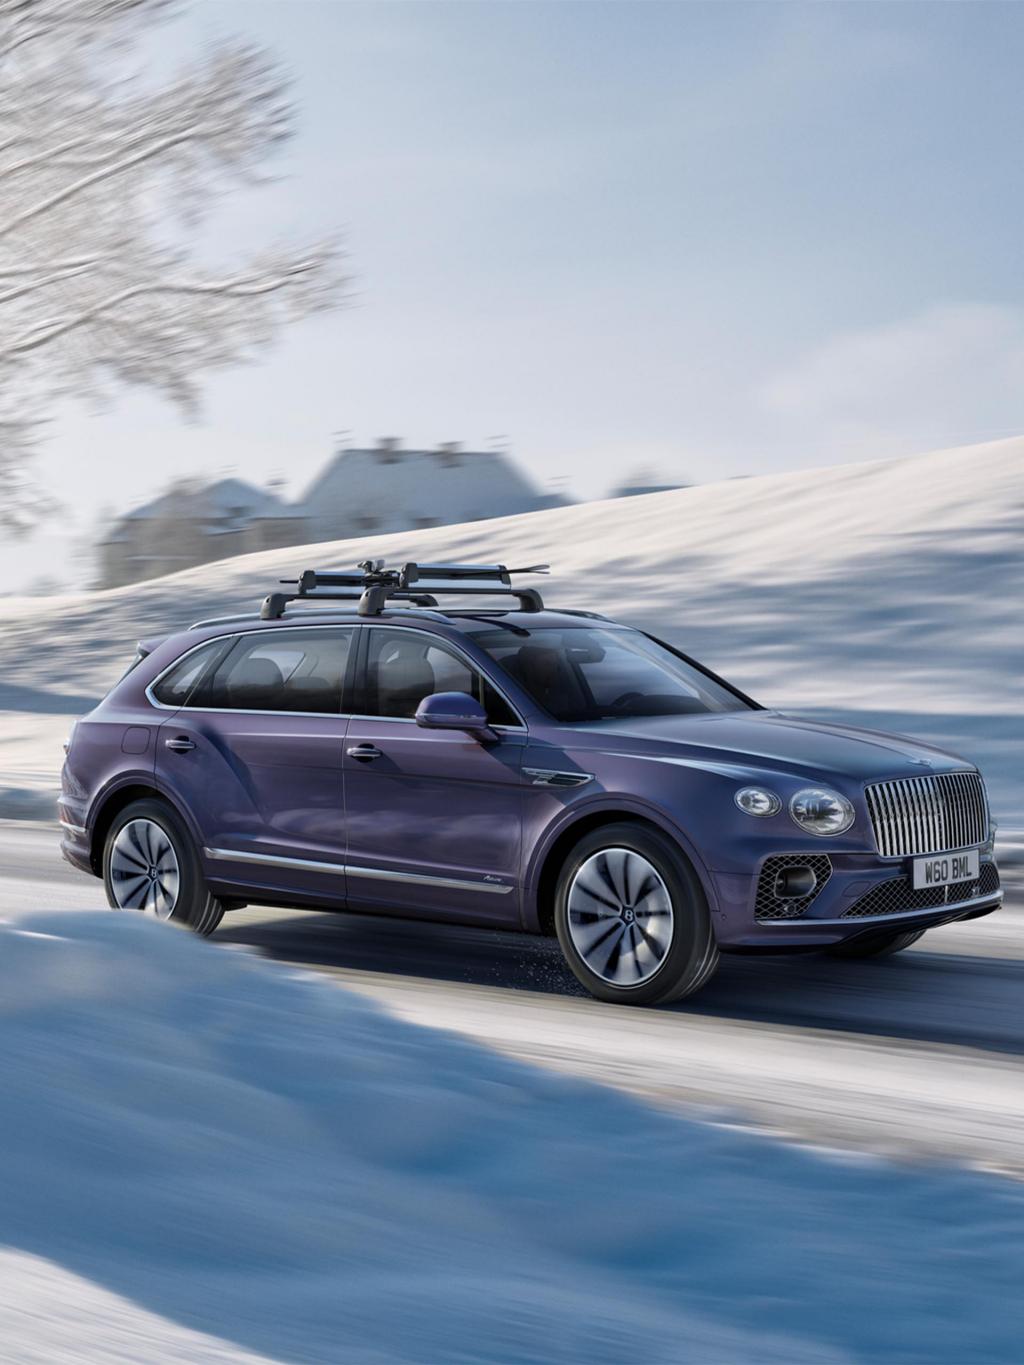 Bentley Bentayga EWB Azure on a snowy road with accessories such as a roof rack, winter tyres and styling specification